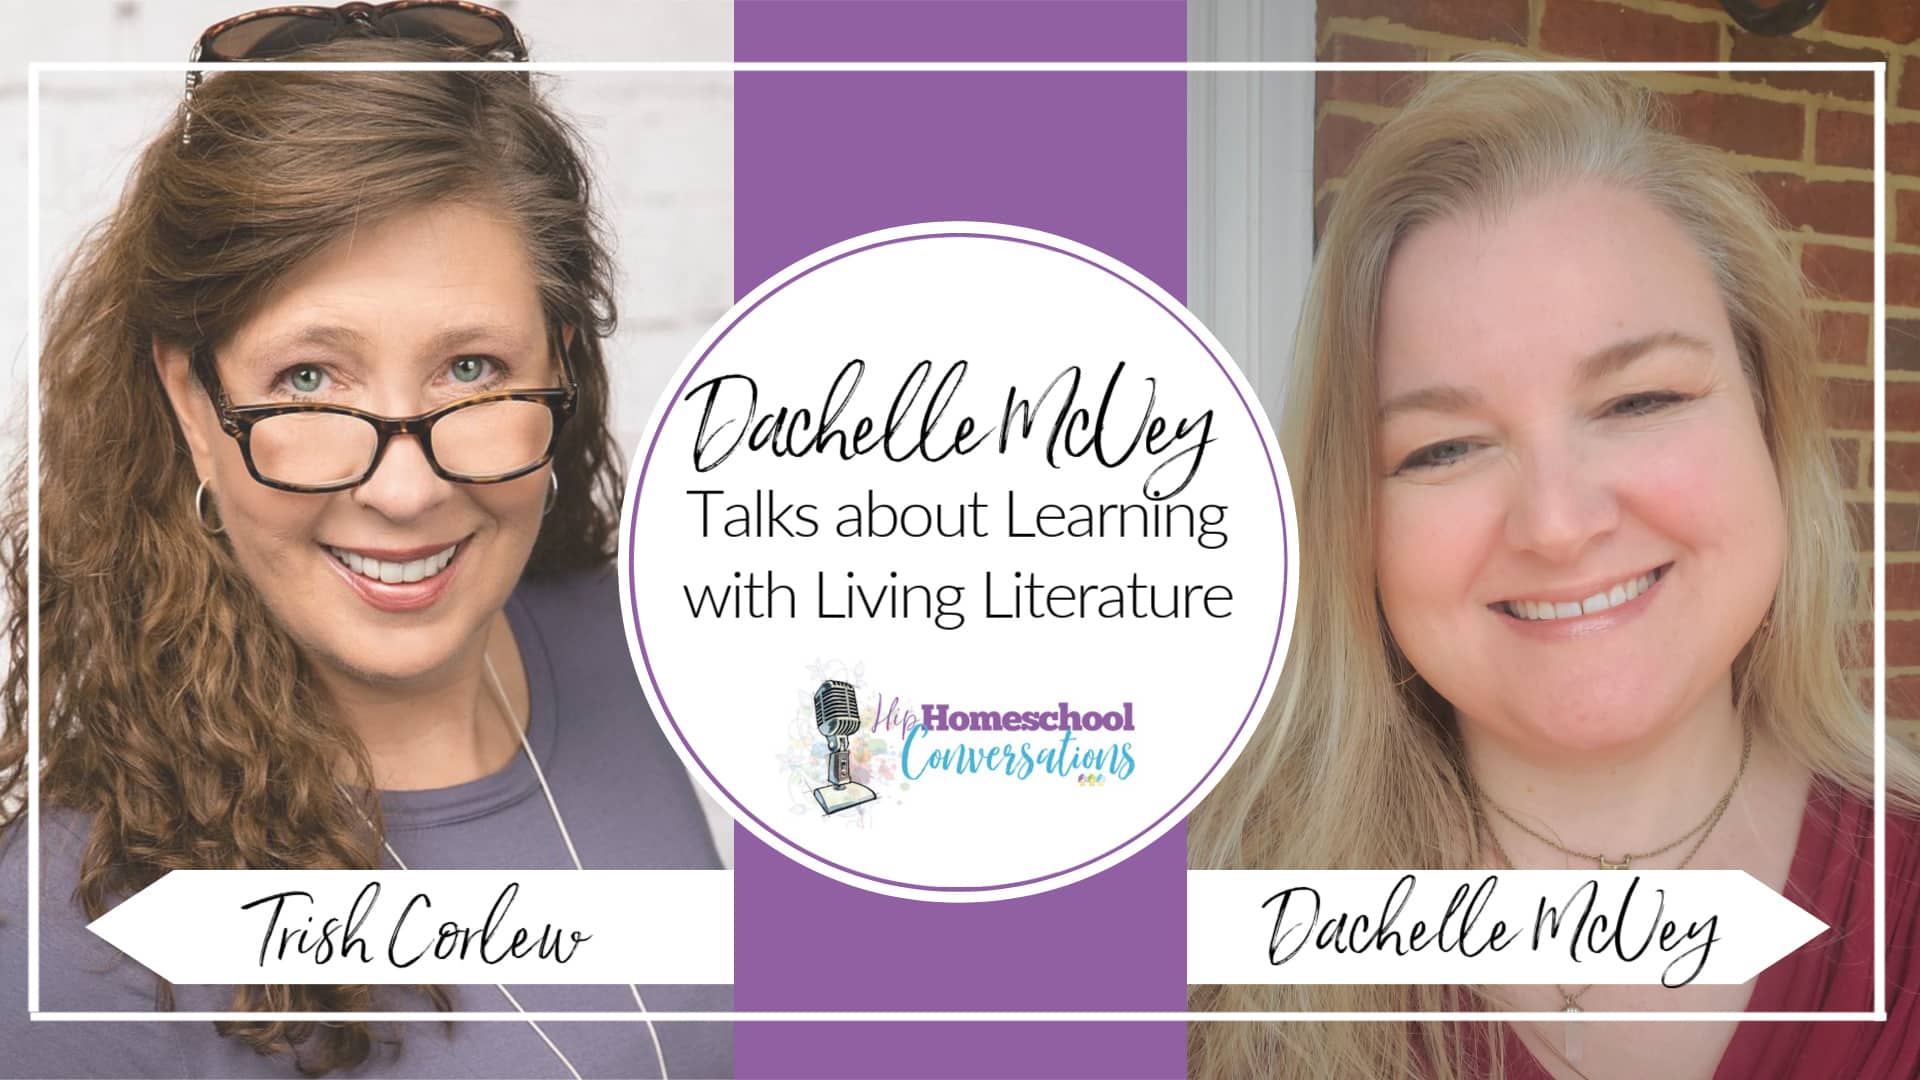 This podcast will inspire tired homeschooling parents to revisit the joy they held as they began their homeschooling journey while leaving behind any former doubt. Join Dachelle to learn more about the beauty and inspiration of Living Literature! You’ll be so glad you did!